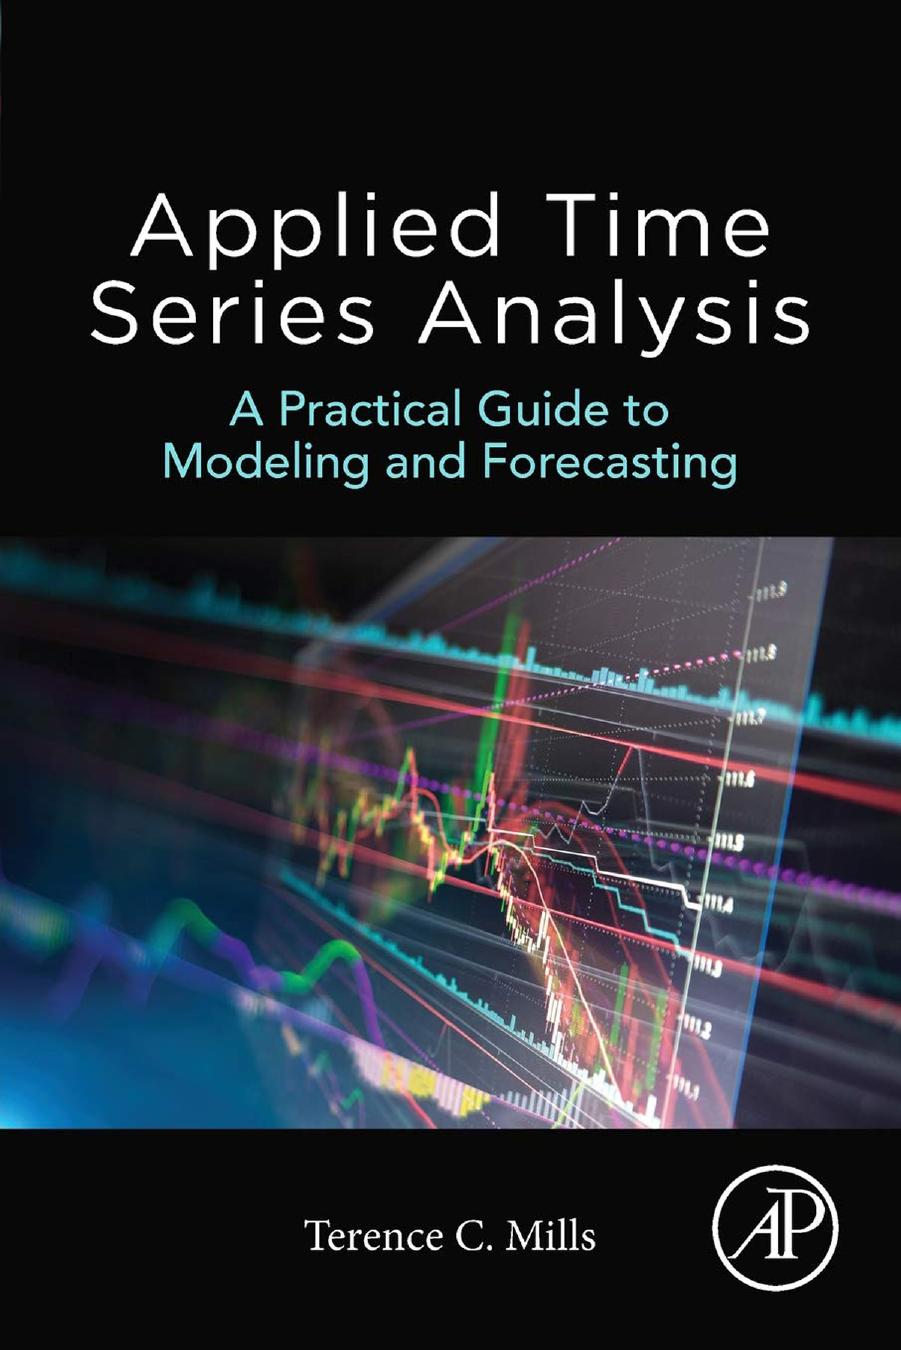 Applied Time Series Analysis A Practical Guide to Modeling and Forecasting 2019